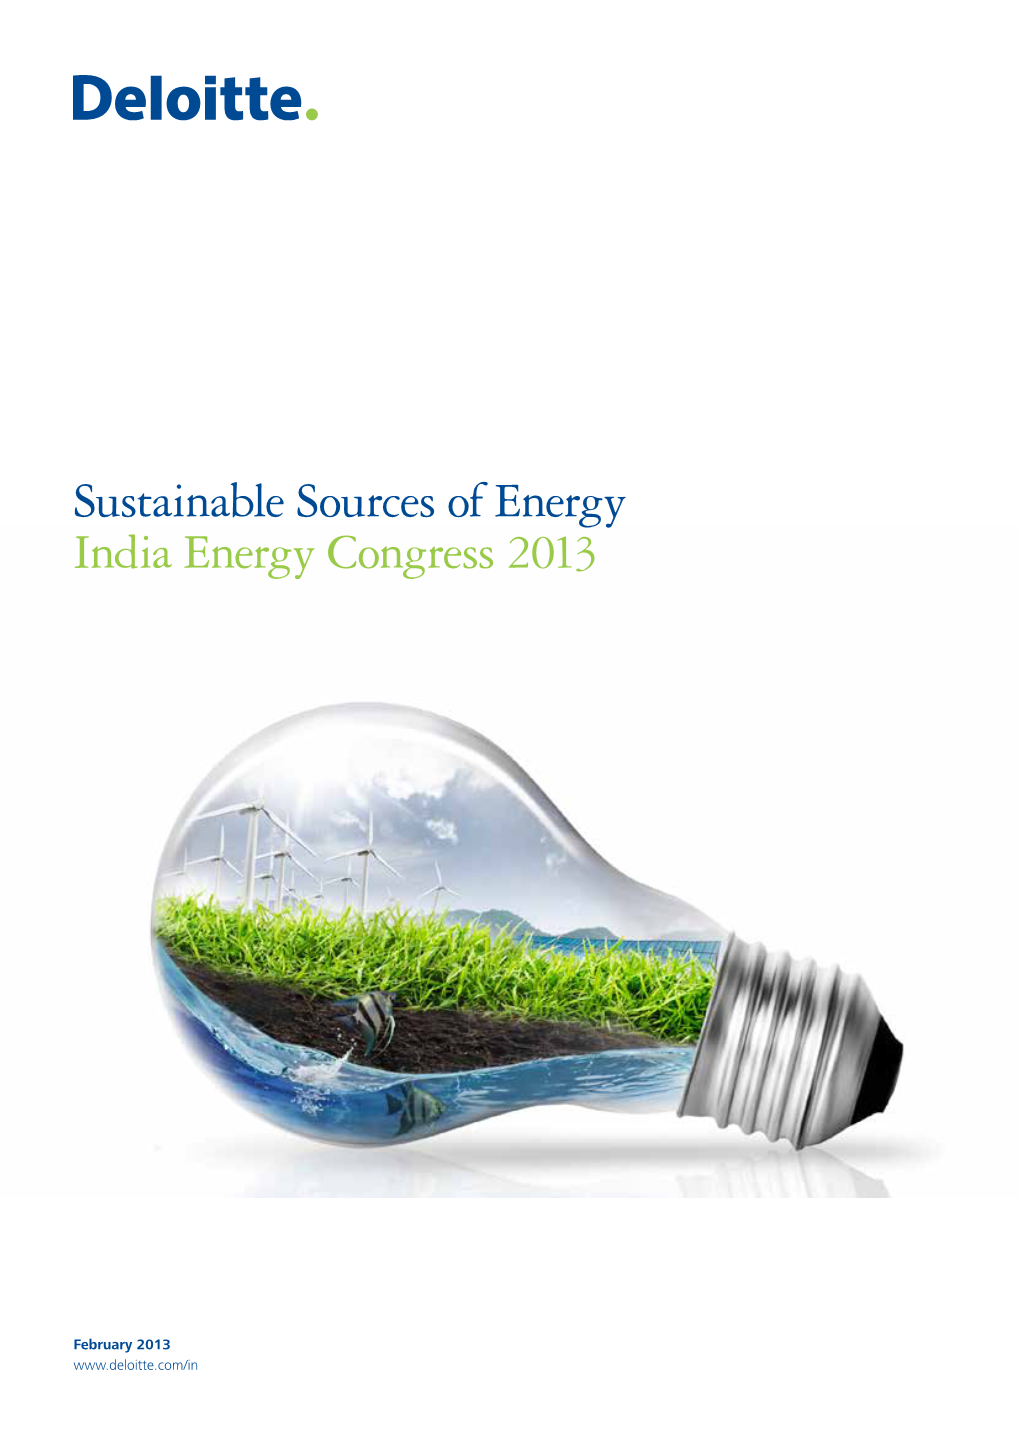 Sustainable Sources of Energy India Energy Congress 2013